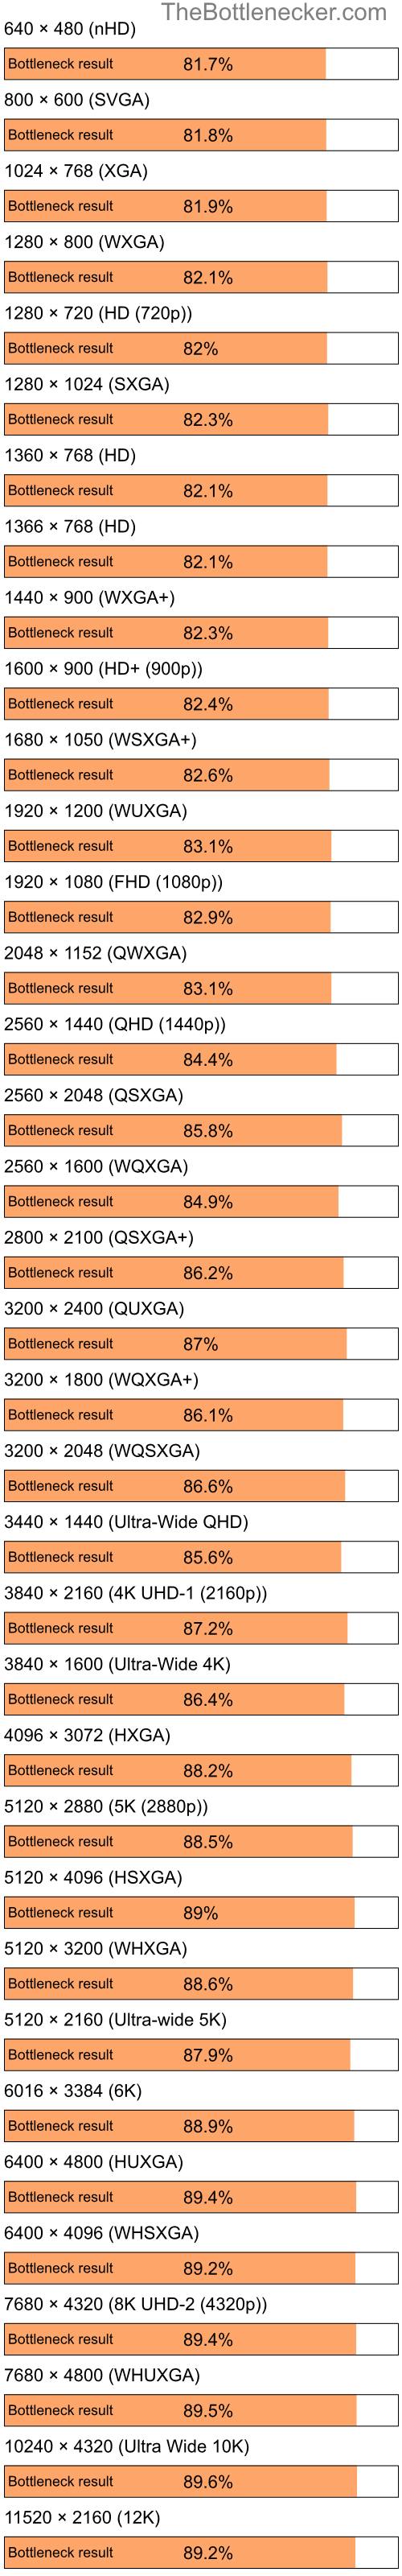 Bottleneck results by resolution for Intel Pentium 4 and NVIDIA GeForce FX 5600 in Processor Intense Tasks